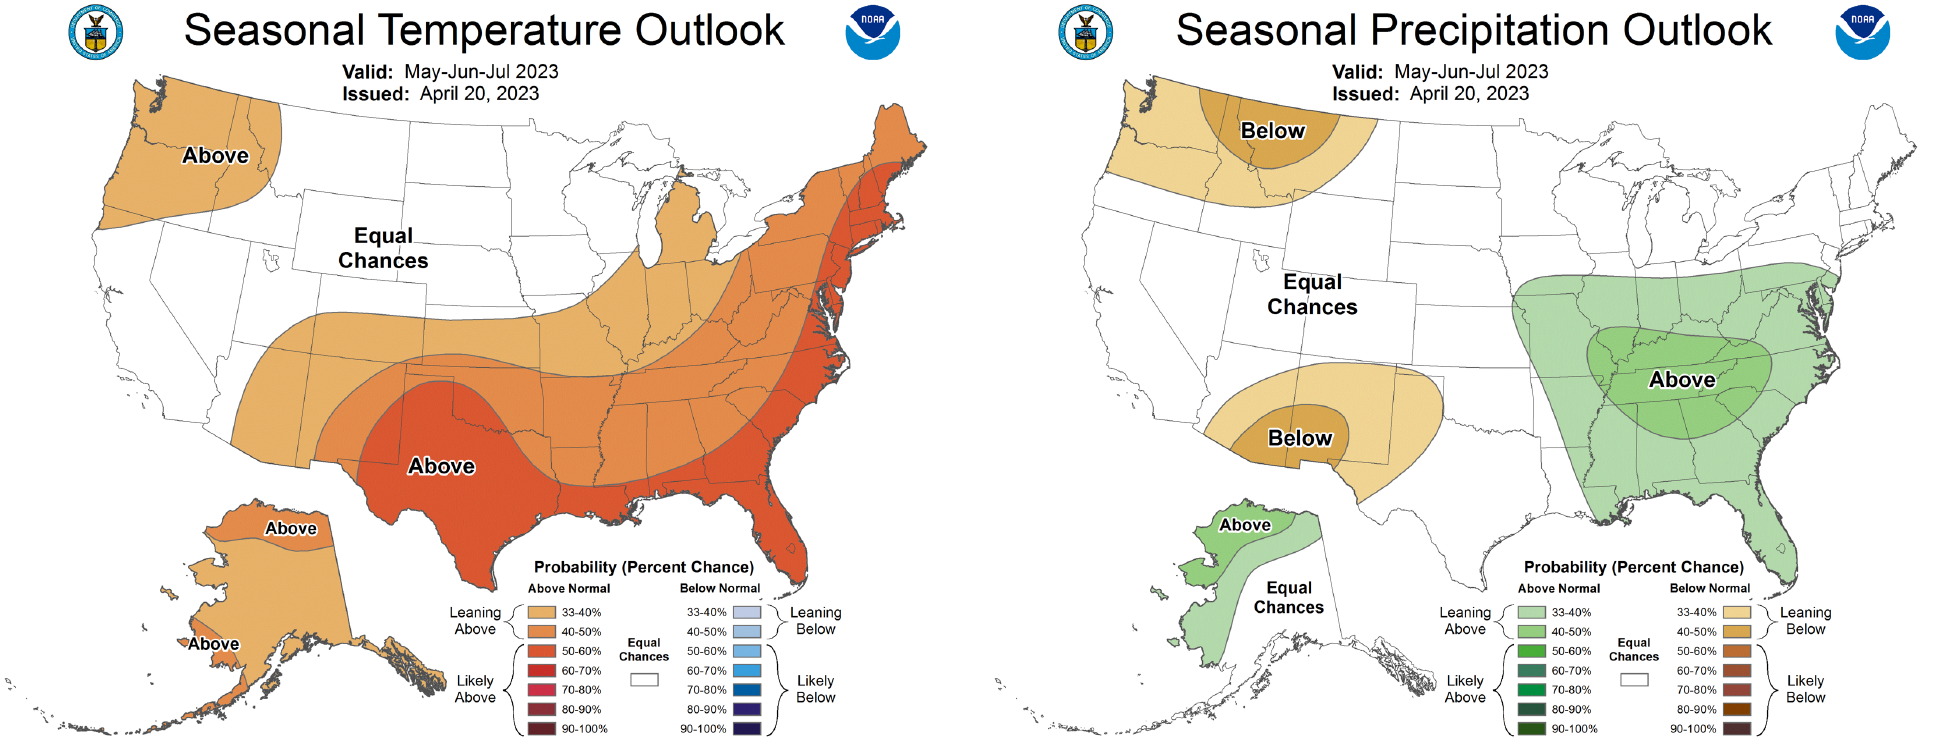 Seasonal temperature and outlook maps.